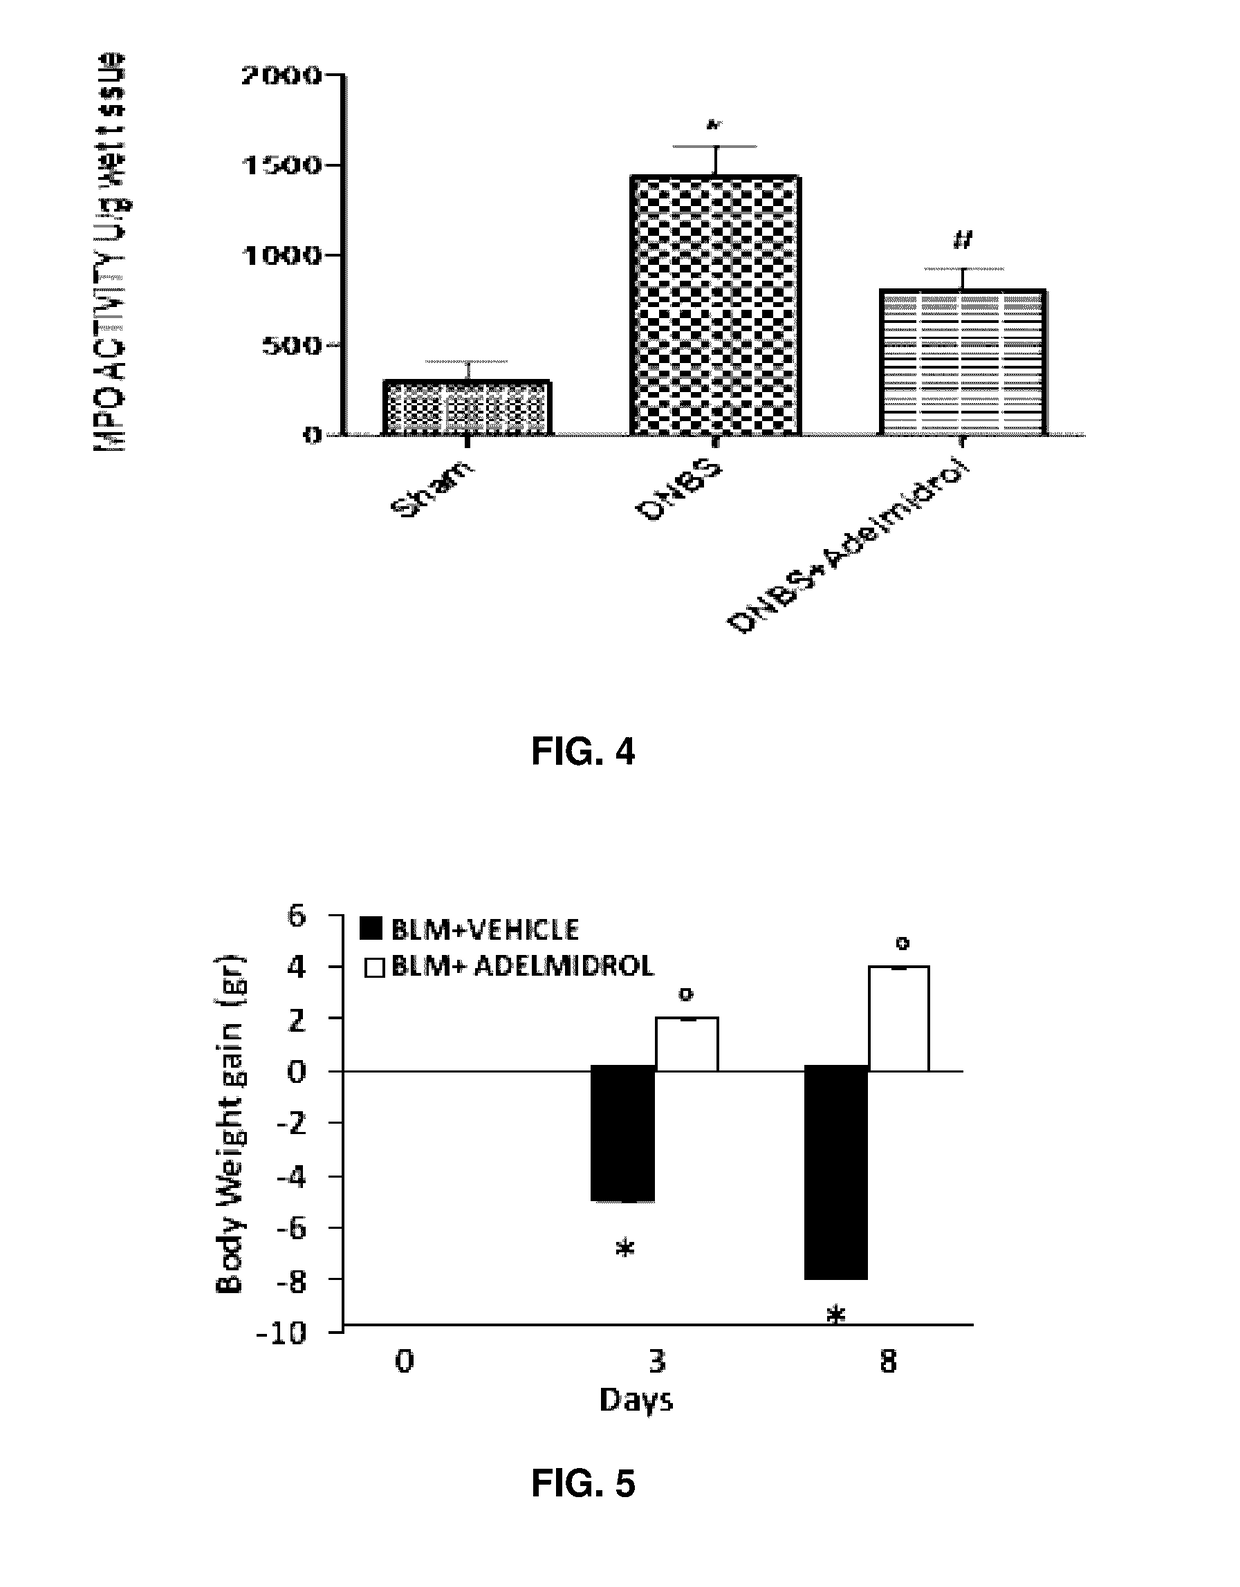 Adelmidrol For Use In Diseases Characterized By Insufficient Agonism Of PPAR-GAMMA Receptor